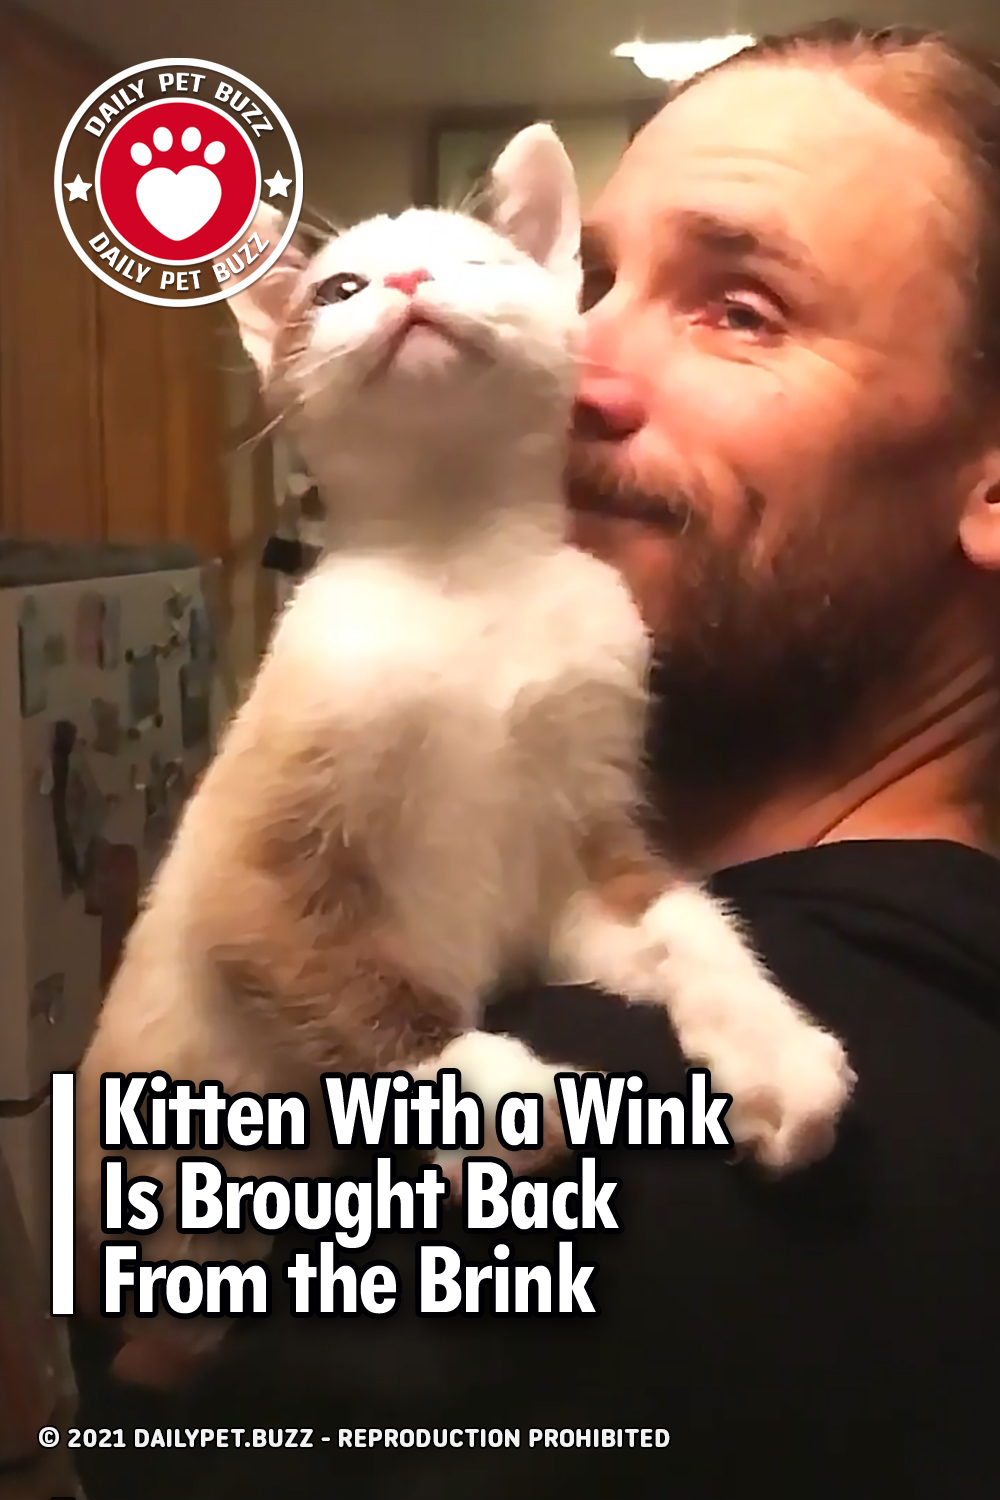 Kitten With a Wink Is Brought Back From the Brink